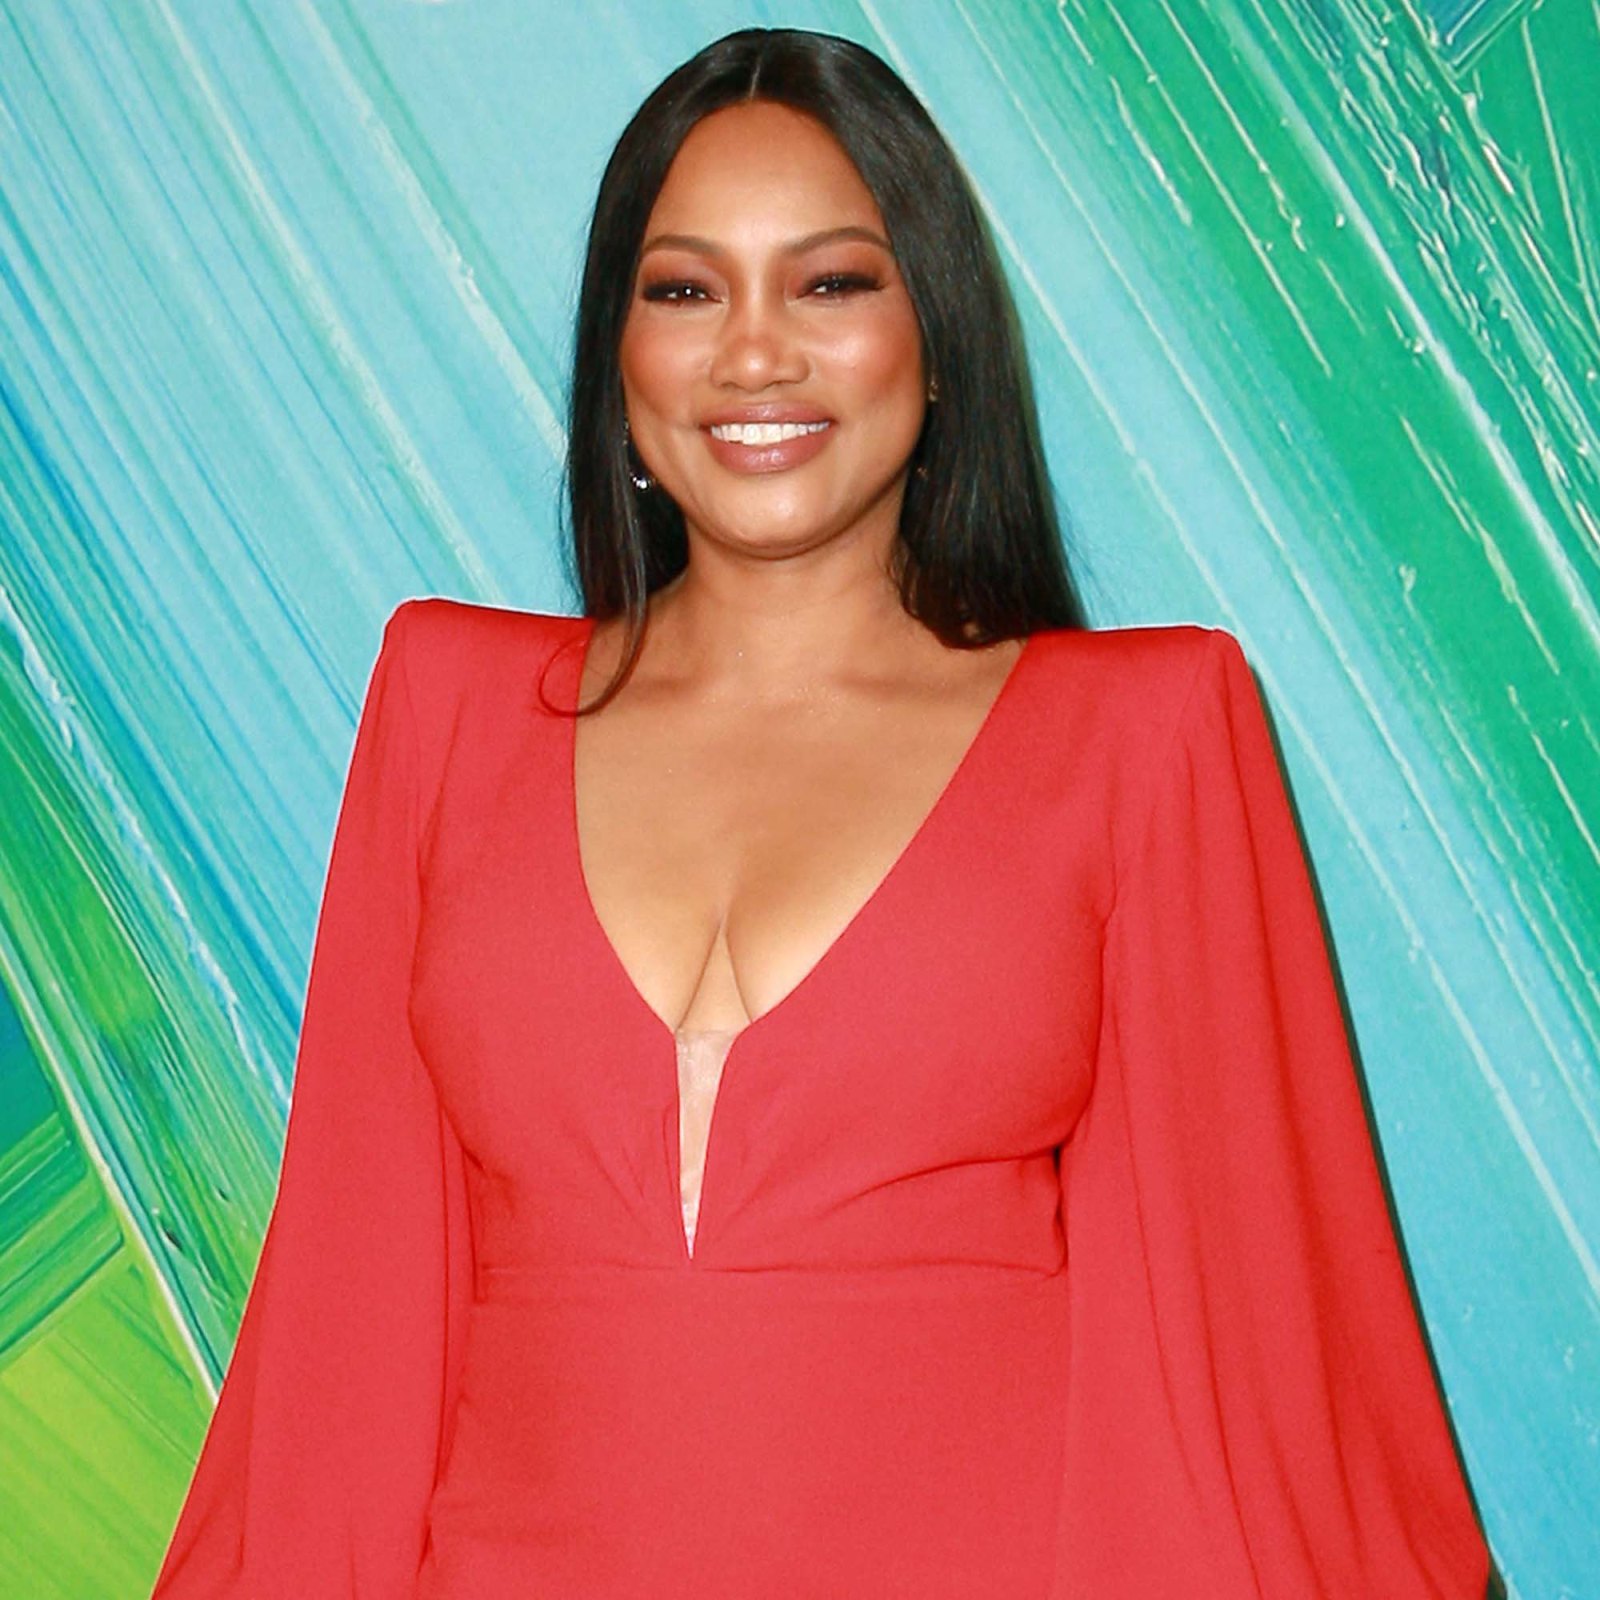 RHOBH's Garcelle Beauvais' Biggest 'Love Me As I Am' Book Revelations